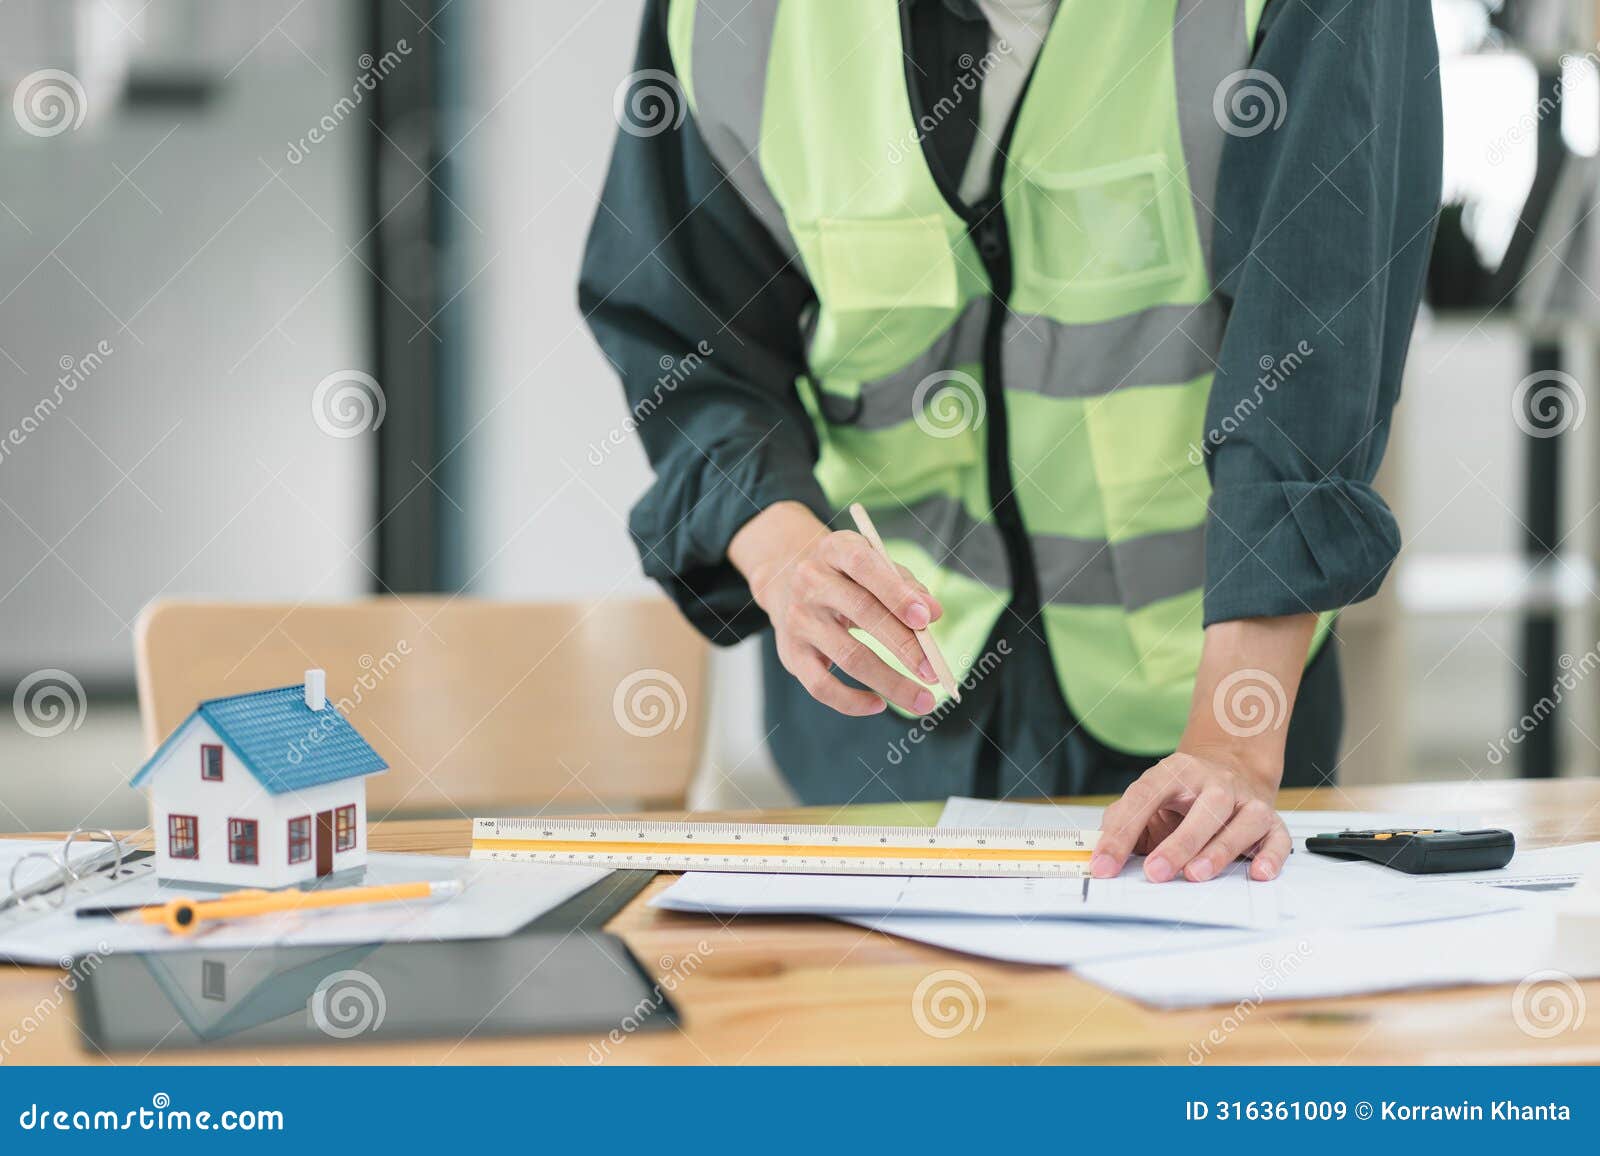 professional male construction engineer reviewing blueprints on worksite.